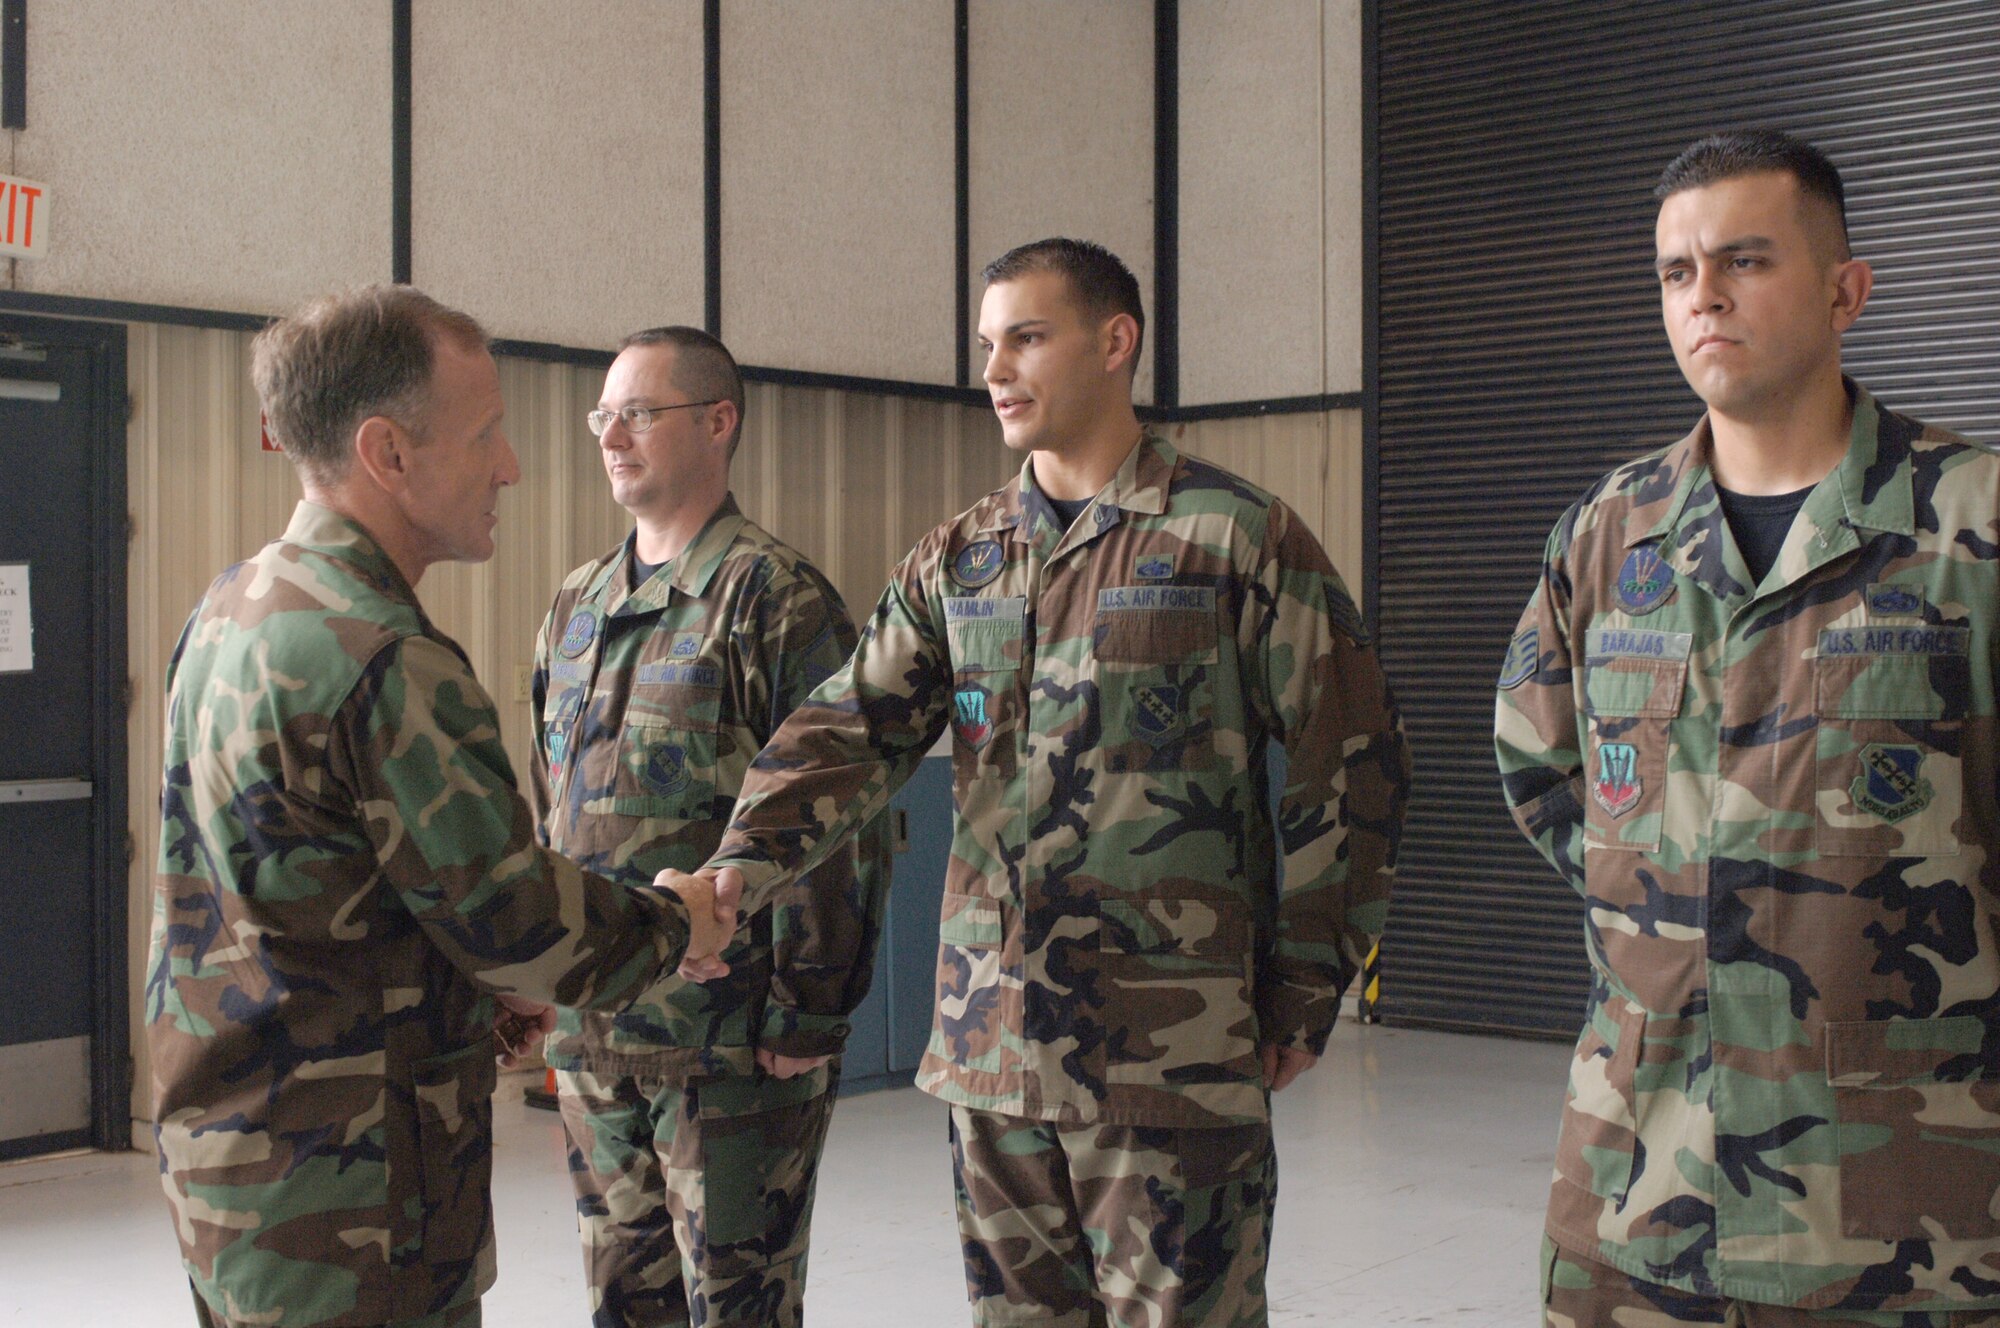 Staff Sgt. Larry Hamlin, 7th Component Maintenance Squadron, and his coworkers, Master Sgt. Mark Carroll (left) and Staff Sgt. Jaime Barajas (right) welcome Lt. Gen. Norman R. Seip, 12th Air Force and Air Forces Southern commander, to Dyess? 7th CMS shop, where the General received a Lean briefing and met many of the maintenance troops.